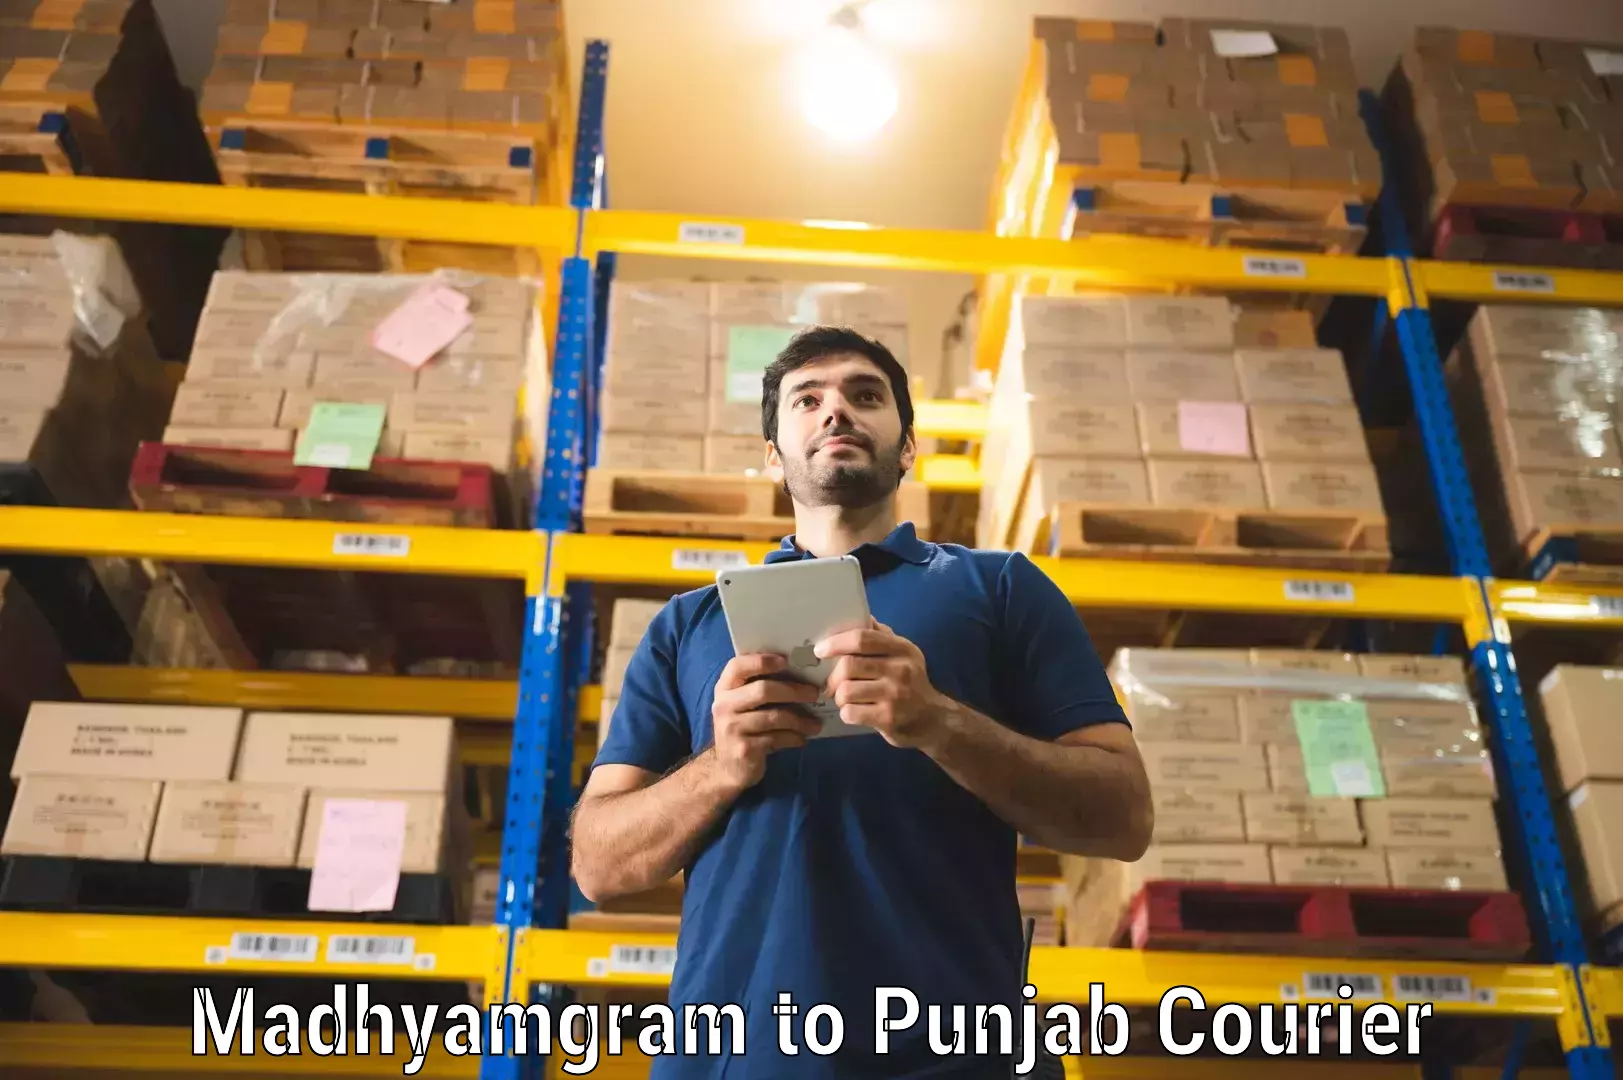 Courier service booking Madhyamgram to Pathankot